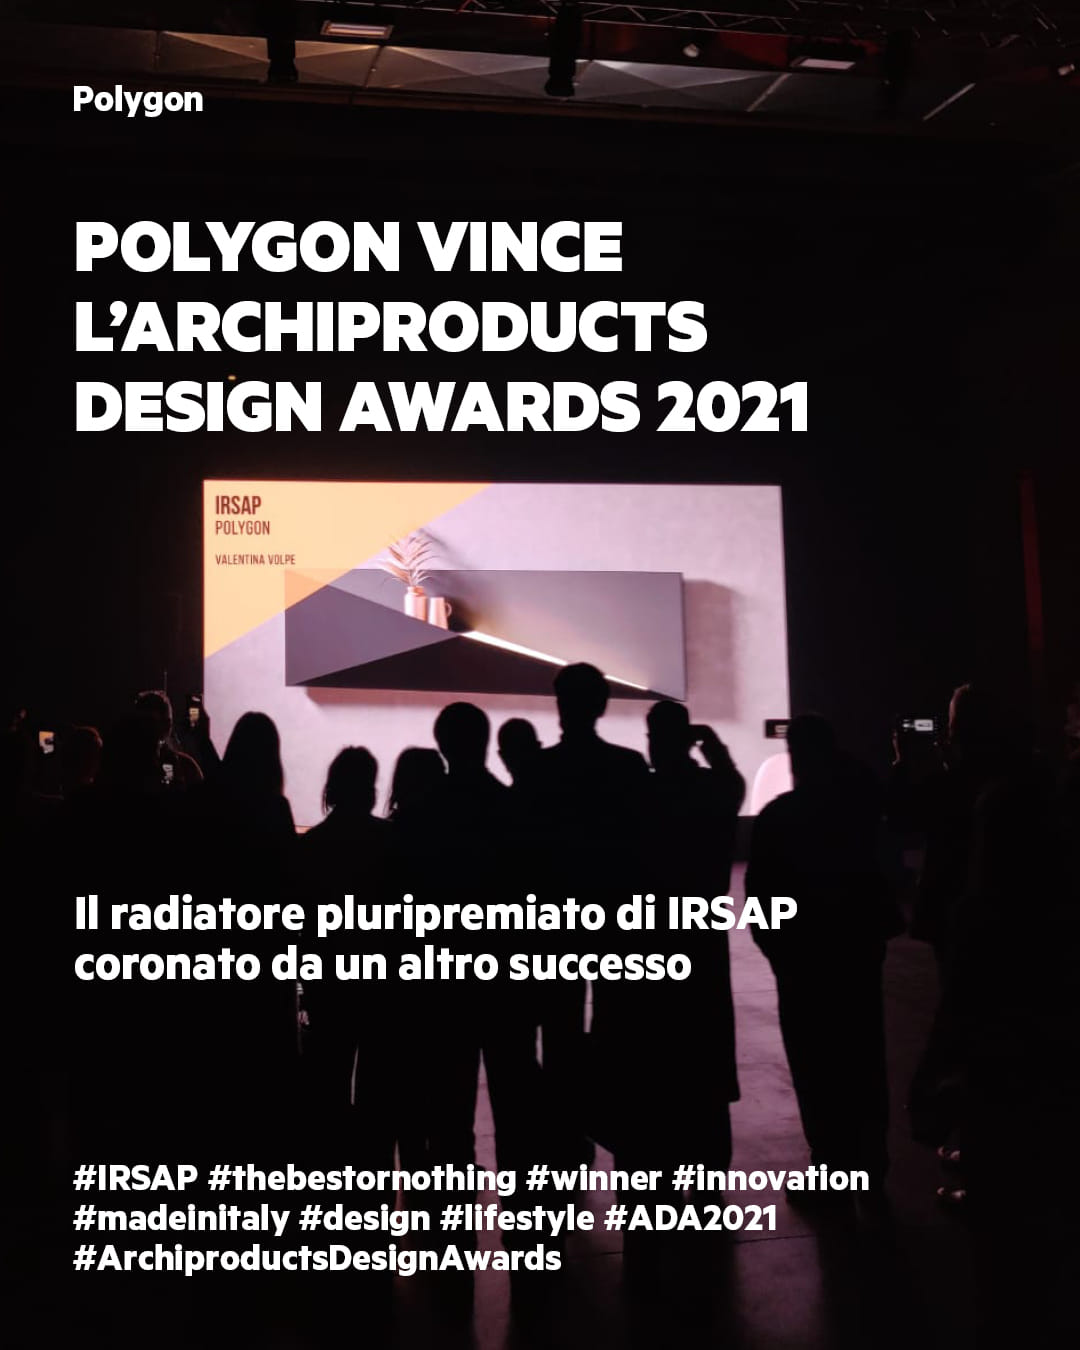 Polygon wins the Archiproducts Design Awards 2021